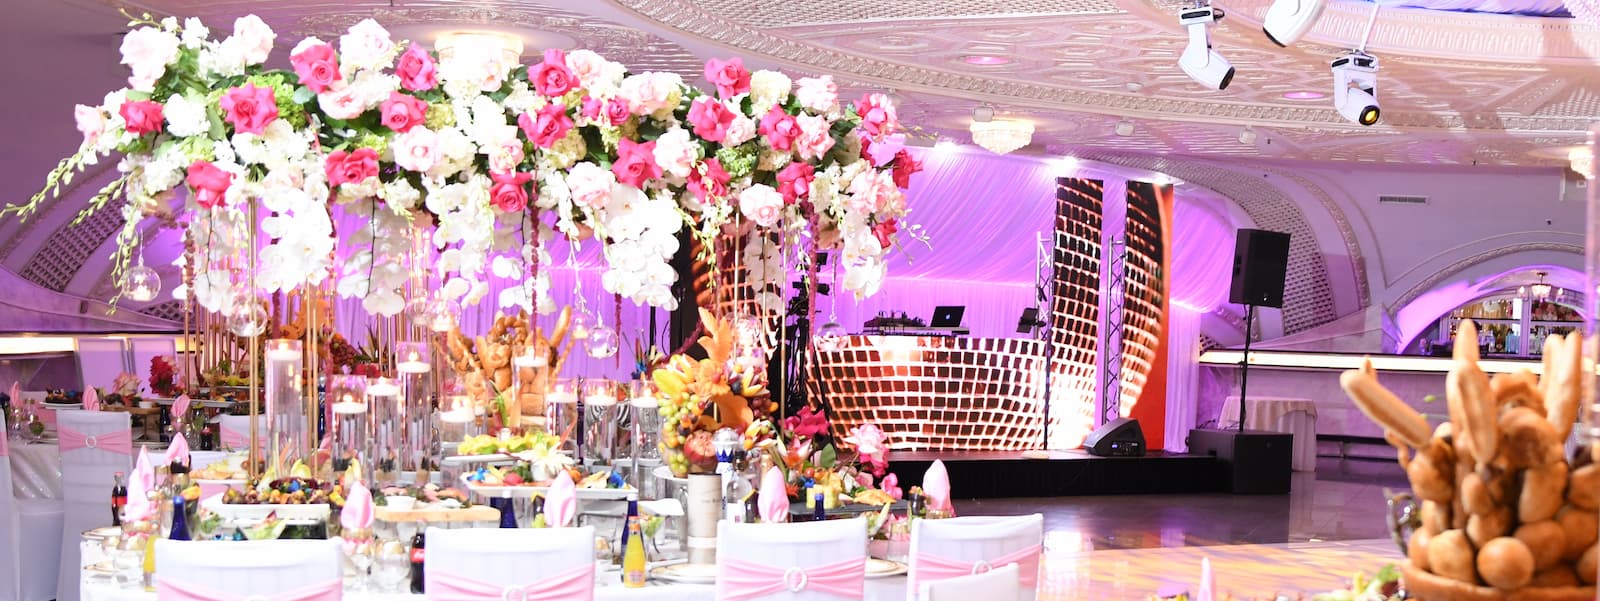 a wedding reception area, with flowers and food on tables